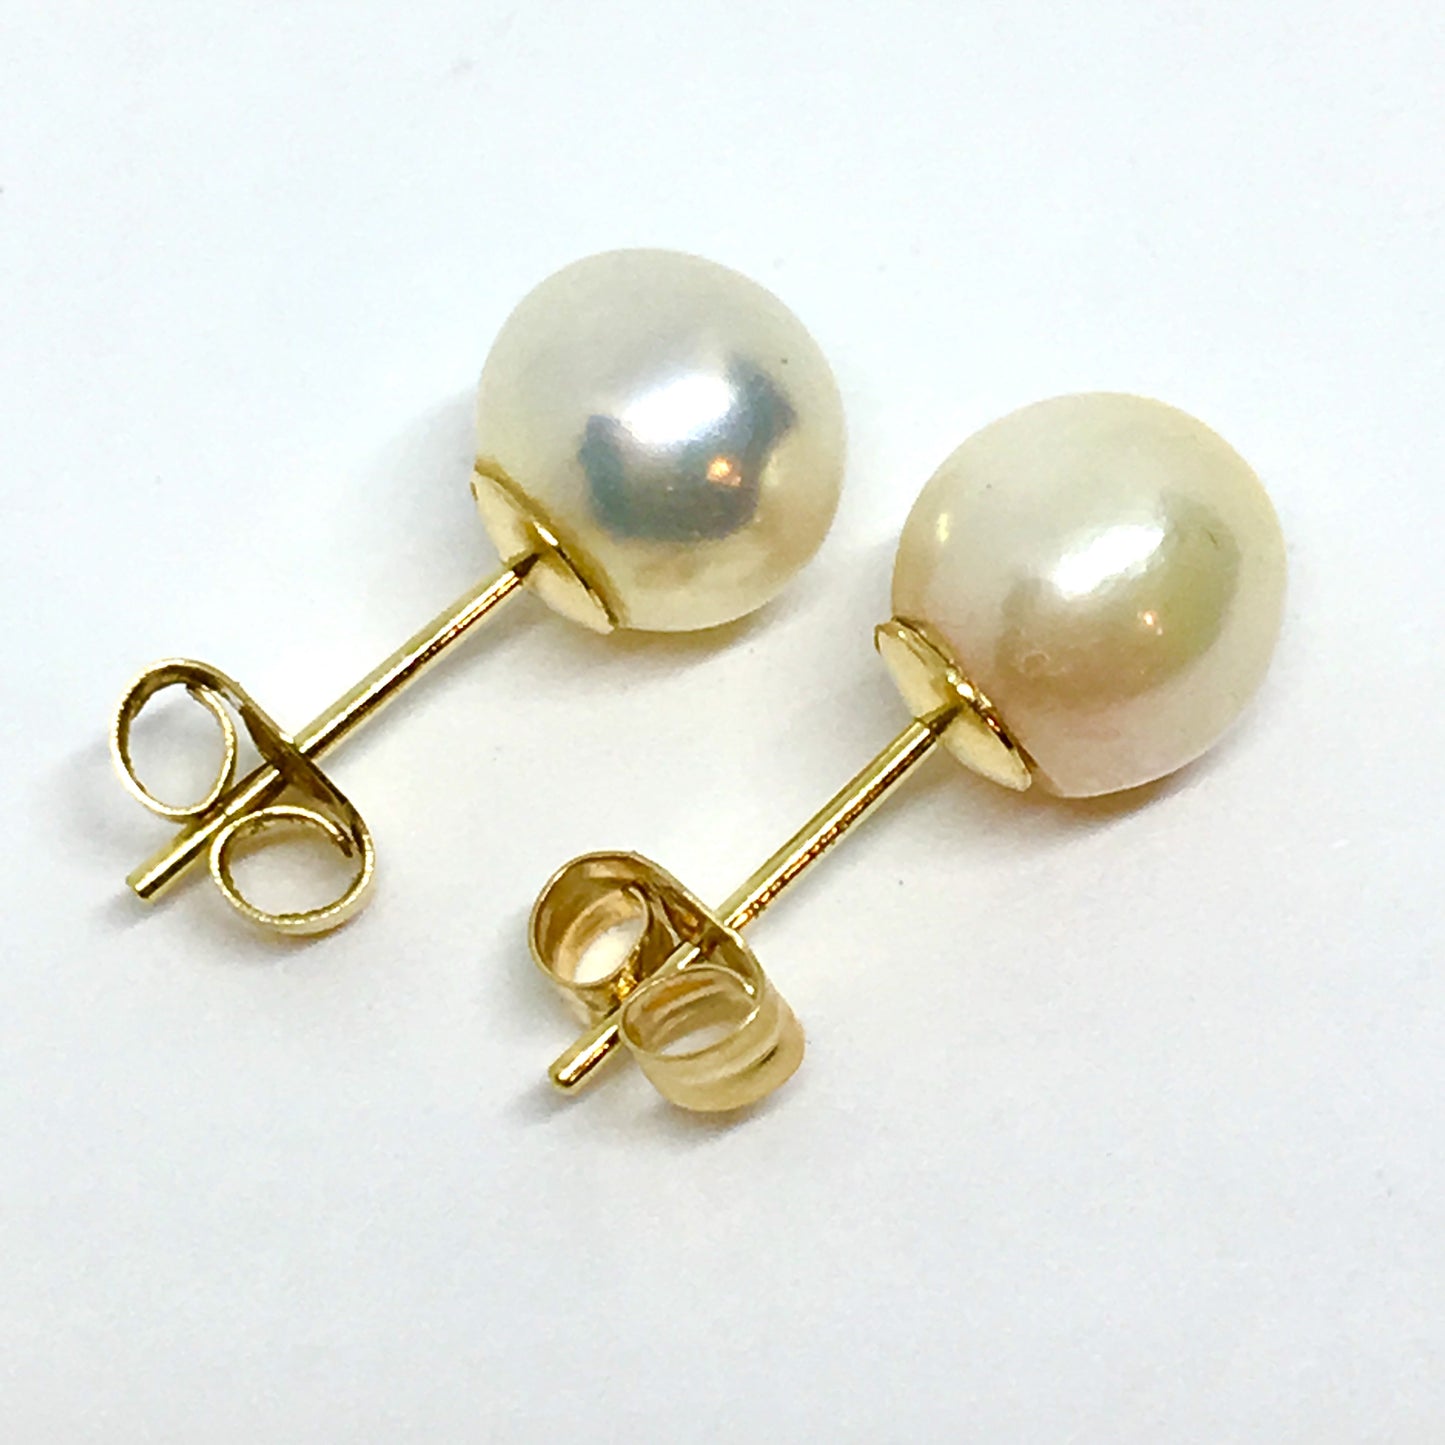 Used Jewelry - 14k Gold 7 mm Traditional Cultured White Pearl Stud Earrings